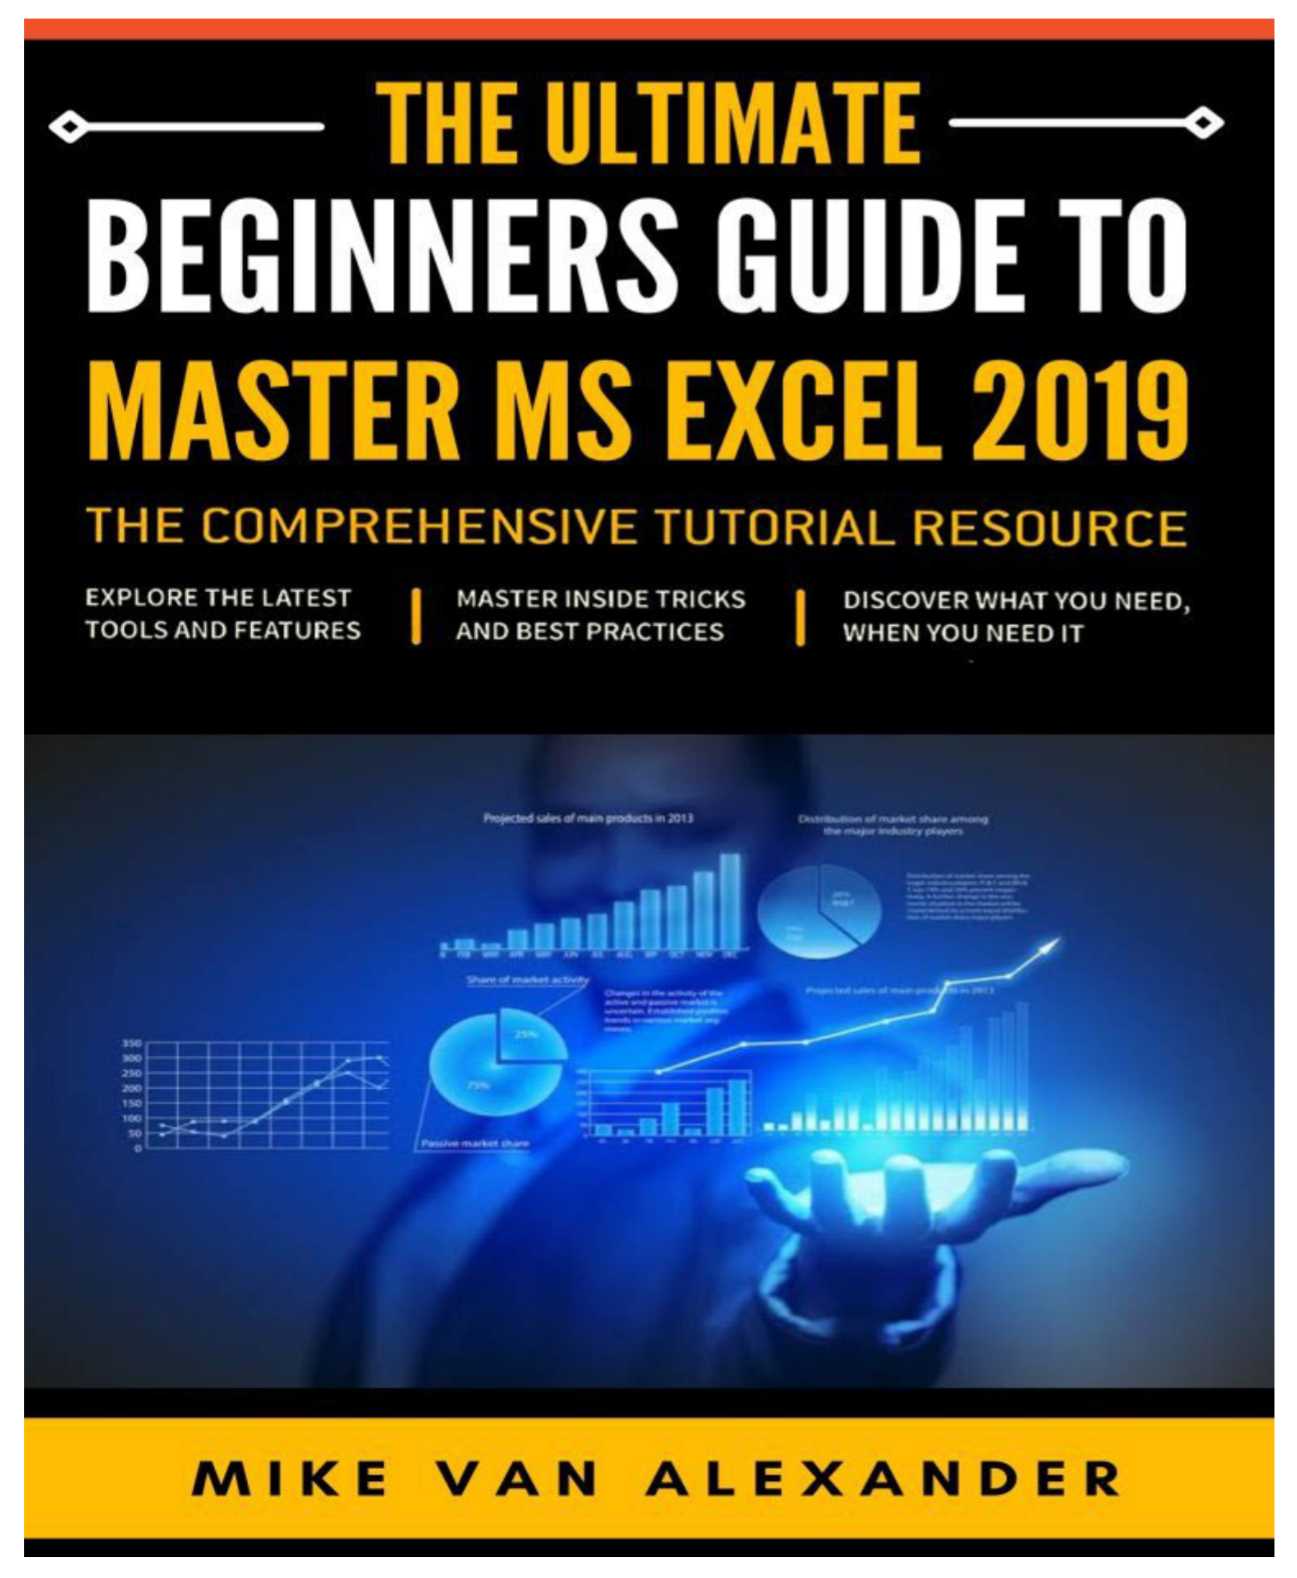 The Ultimate Beginners Guide To Master Ms Excel Formulas And Function Within Hour PDF